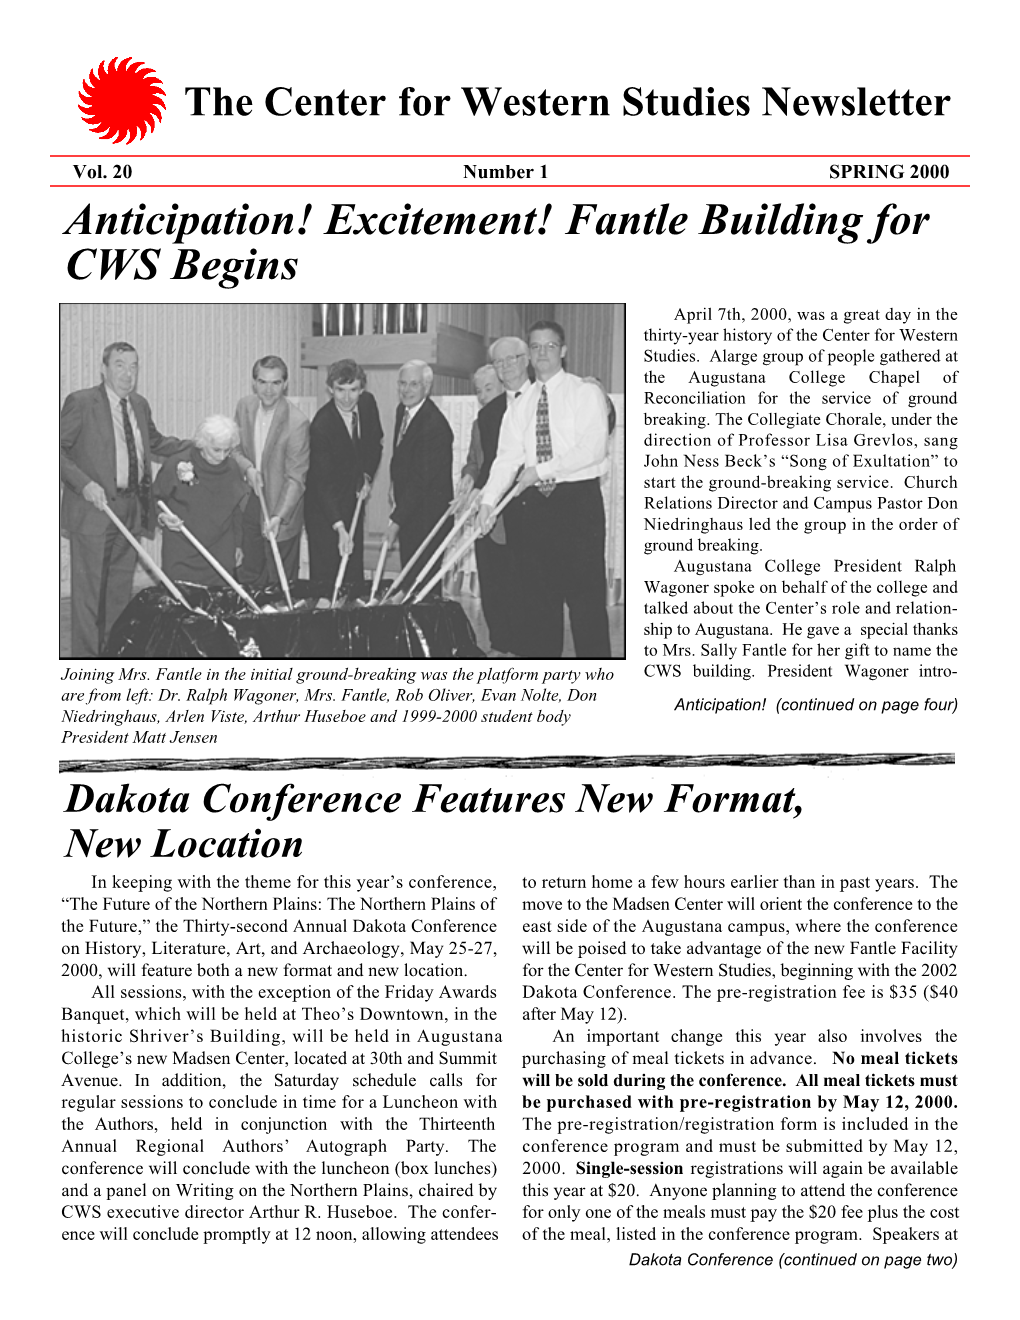 Fantle Building for CWS Begins April 7Th, 2000, Was a Great Day in the Thirty-Year History of the Center for Western Studies